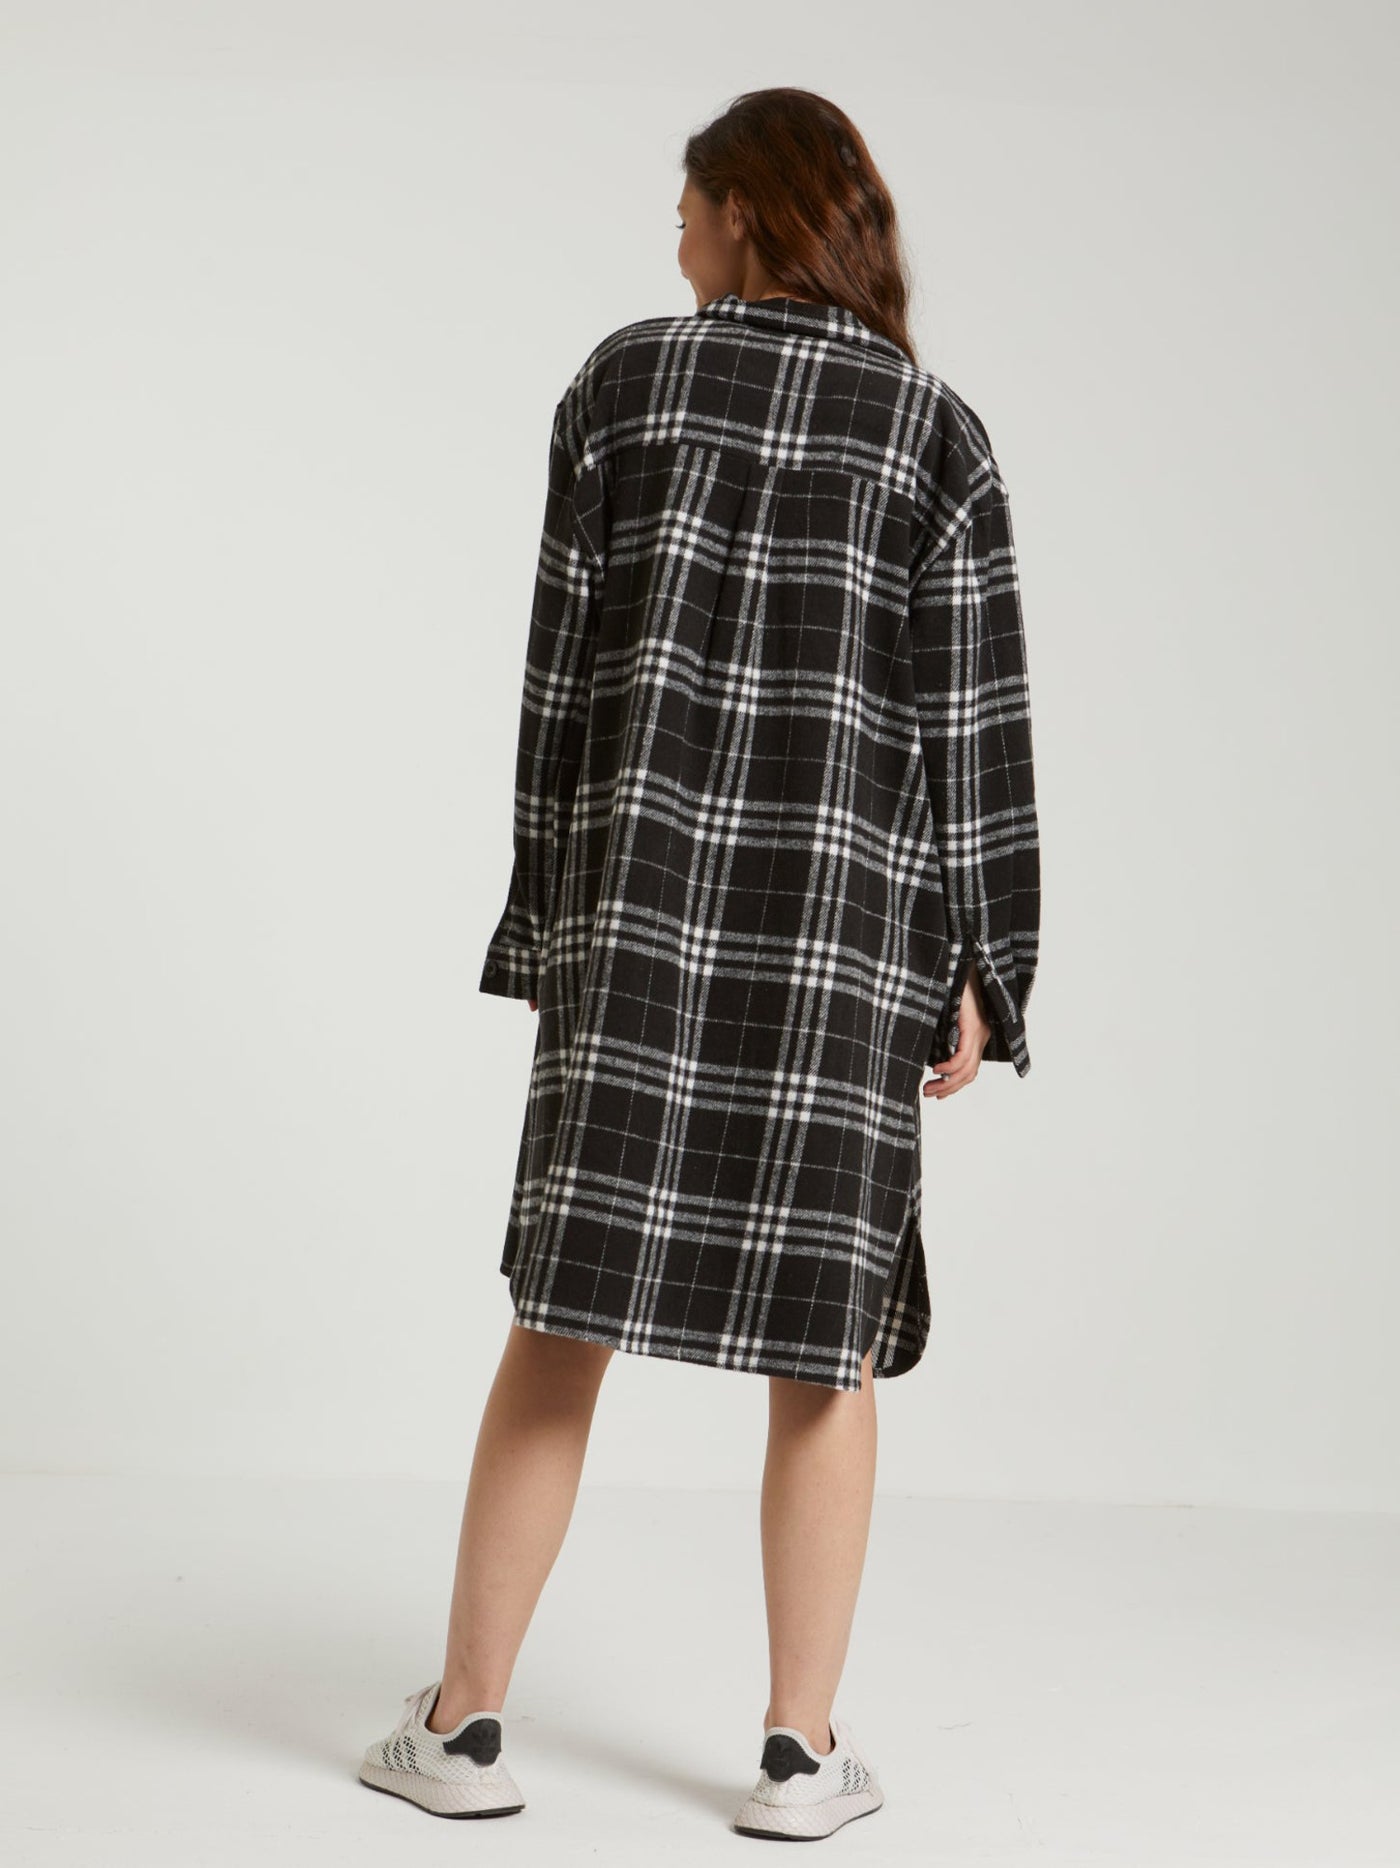 Coat - Checkered - Buttoned